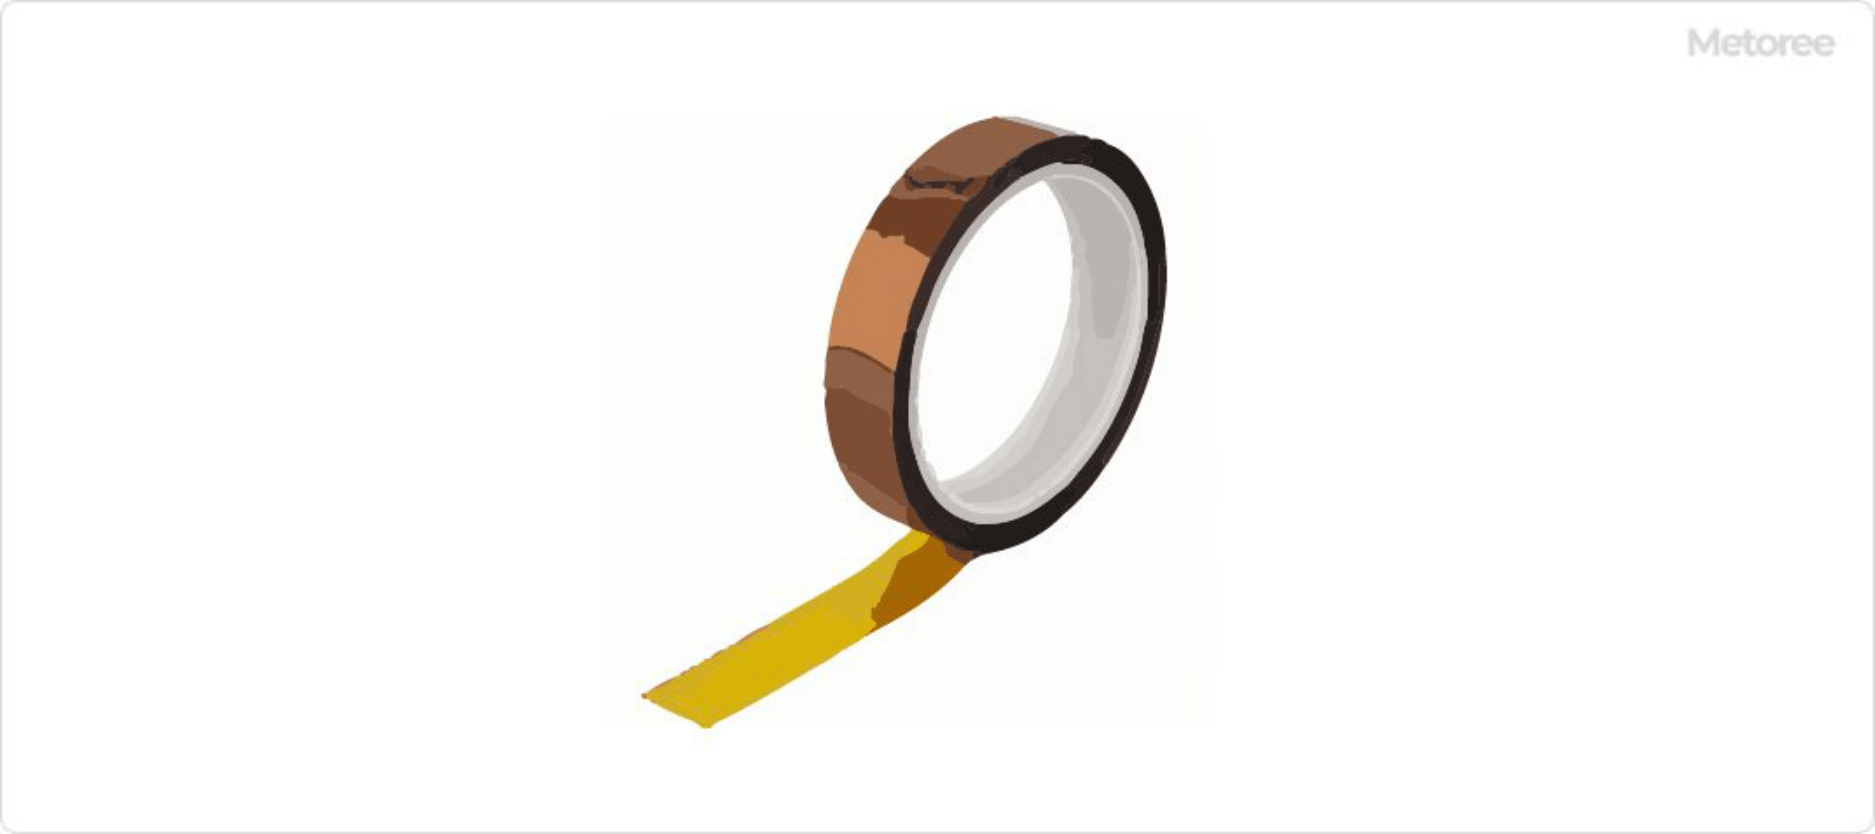 Figure 1. Image of polyimide tape